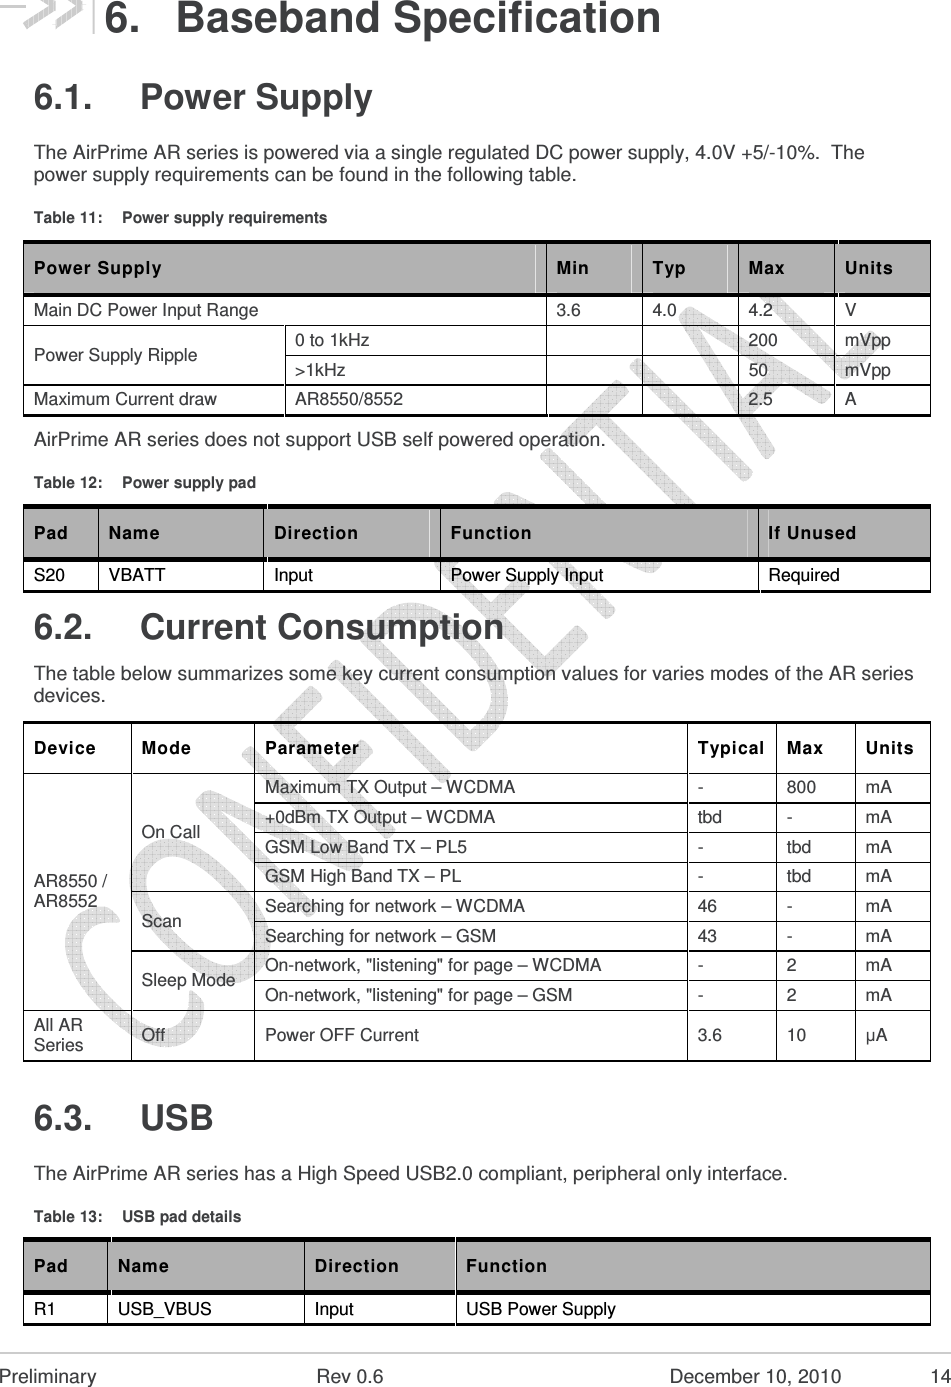  Preliminary  Rev 0.6  December 10, 2010  14 6.  Baseband Specification 6.1.  Power Supply The AirPrime AR series is powered via a single regulated DC power supply, 4.0V +5/-10%.  The power supply requirements can be found in the following table. Table 11:  Power supply requirements Power Supply  Min  Typ  Max  Units Main DC Power Input Range  3.6  4.0  4.2  V Power Supply Ripple  0 to 1kHz      200  mVpp &gt;1kHz      50  mVpp Maximum Current draw  AR8550/8552      2.5  A AirPrime AR series does not support USB self powered operation. Table 12:  Power supply pad Pad  Name  Direction  Function  If Unused S20  VBATT  Input  Power Supply Input  Required 6.2.  Current Consumption The table below summarizes some key current consumption values for varies modes of the AR series devices. Device  Mode  Parameter  Typical Max   Units AR8550 / AR8552 On Call Maximum TX Output – WCDMA  -   800   mA  +0dBm TX Output – WCDMA  tbd   -   mA  GSM Low Band TX – PL5  -  tbd  mA GSM High Band TX – PL   -  tbd  mA Scan  Searching for network – WCDMA  46  -  mA Searching for network – GSM  43  -  mA Sleep Mode  On-network, &quot;listening&quot; for page – WCDMA  -  2  mA On-network, &quot;listening&quot; for page – GSM  -  2  mA All AR Series  Off   Power OFF Current  3.6  10  µA 6.3.  USB The AirPrime AR series has a High Speed USB2.0 compliant, peripheral only interface. Table 13:  USB pad details Pad  Name  Direction  Function R1  USB_VBUS  Input  USB Power Supply 